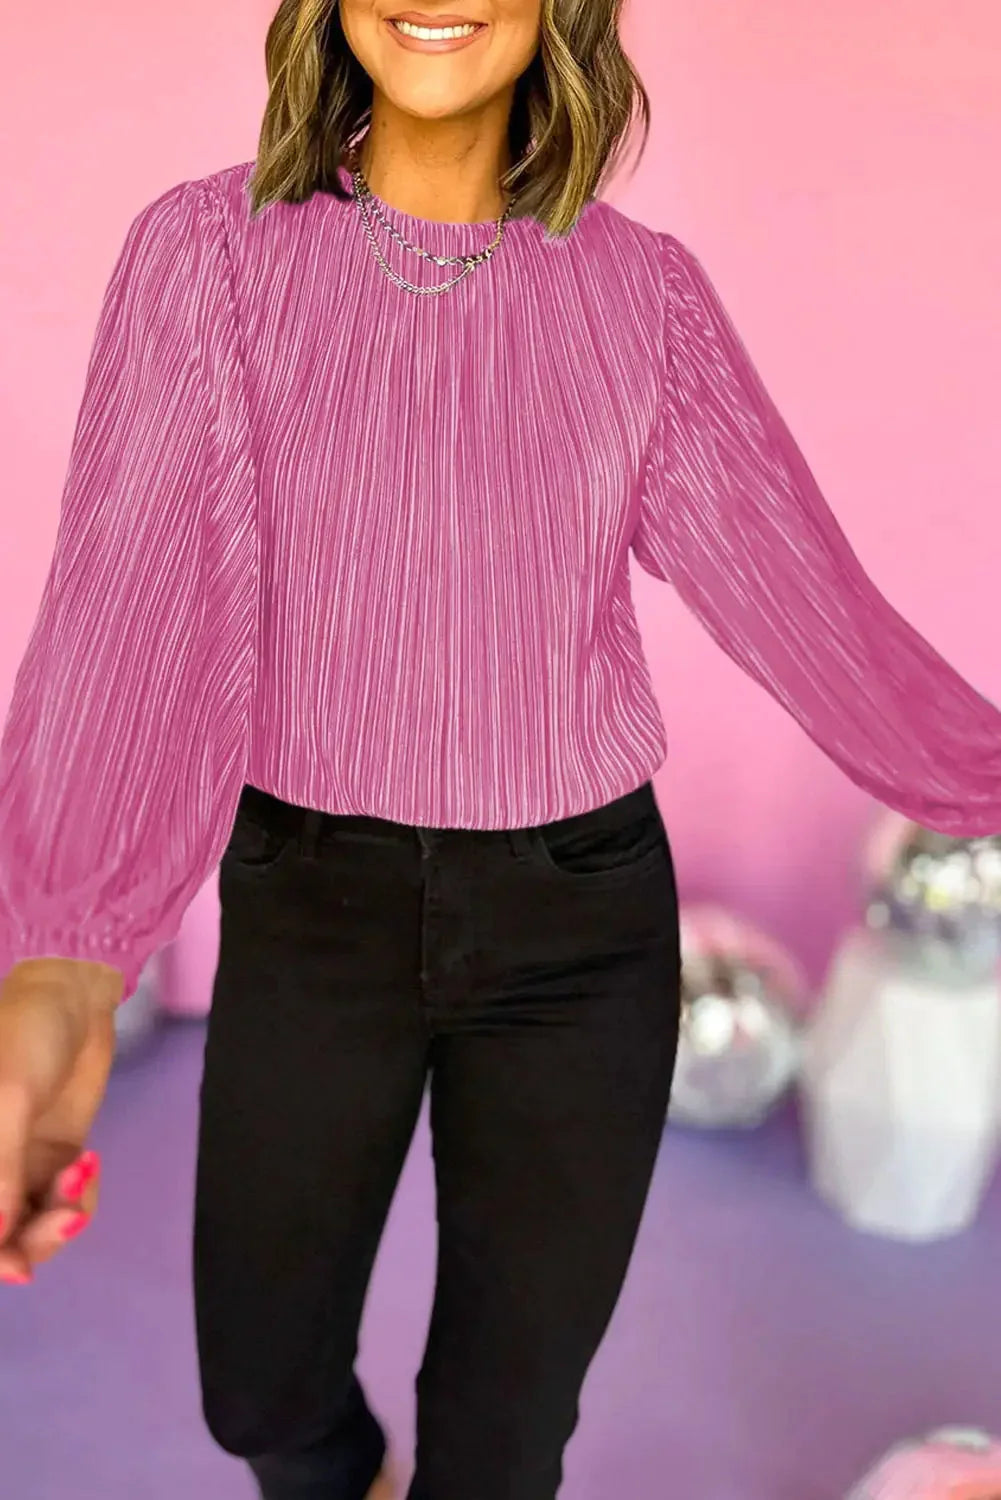 Bonbon pleated luster long sleeve blouse - l / 100% polyester - blouses & shirts